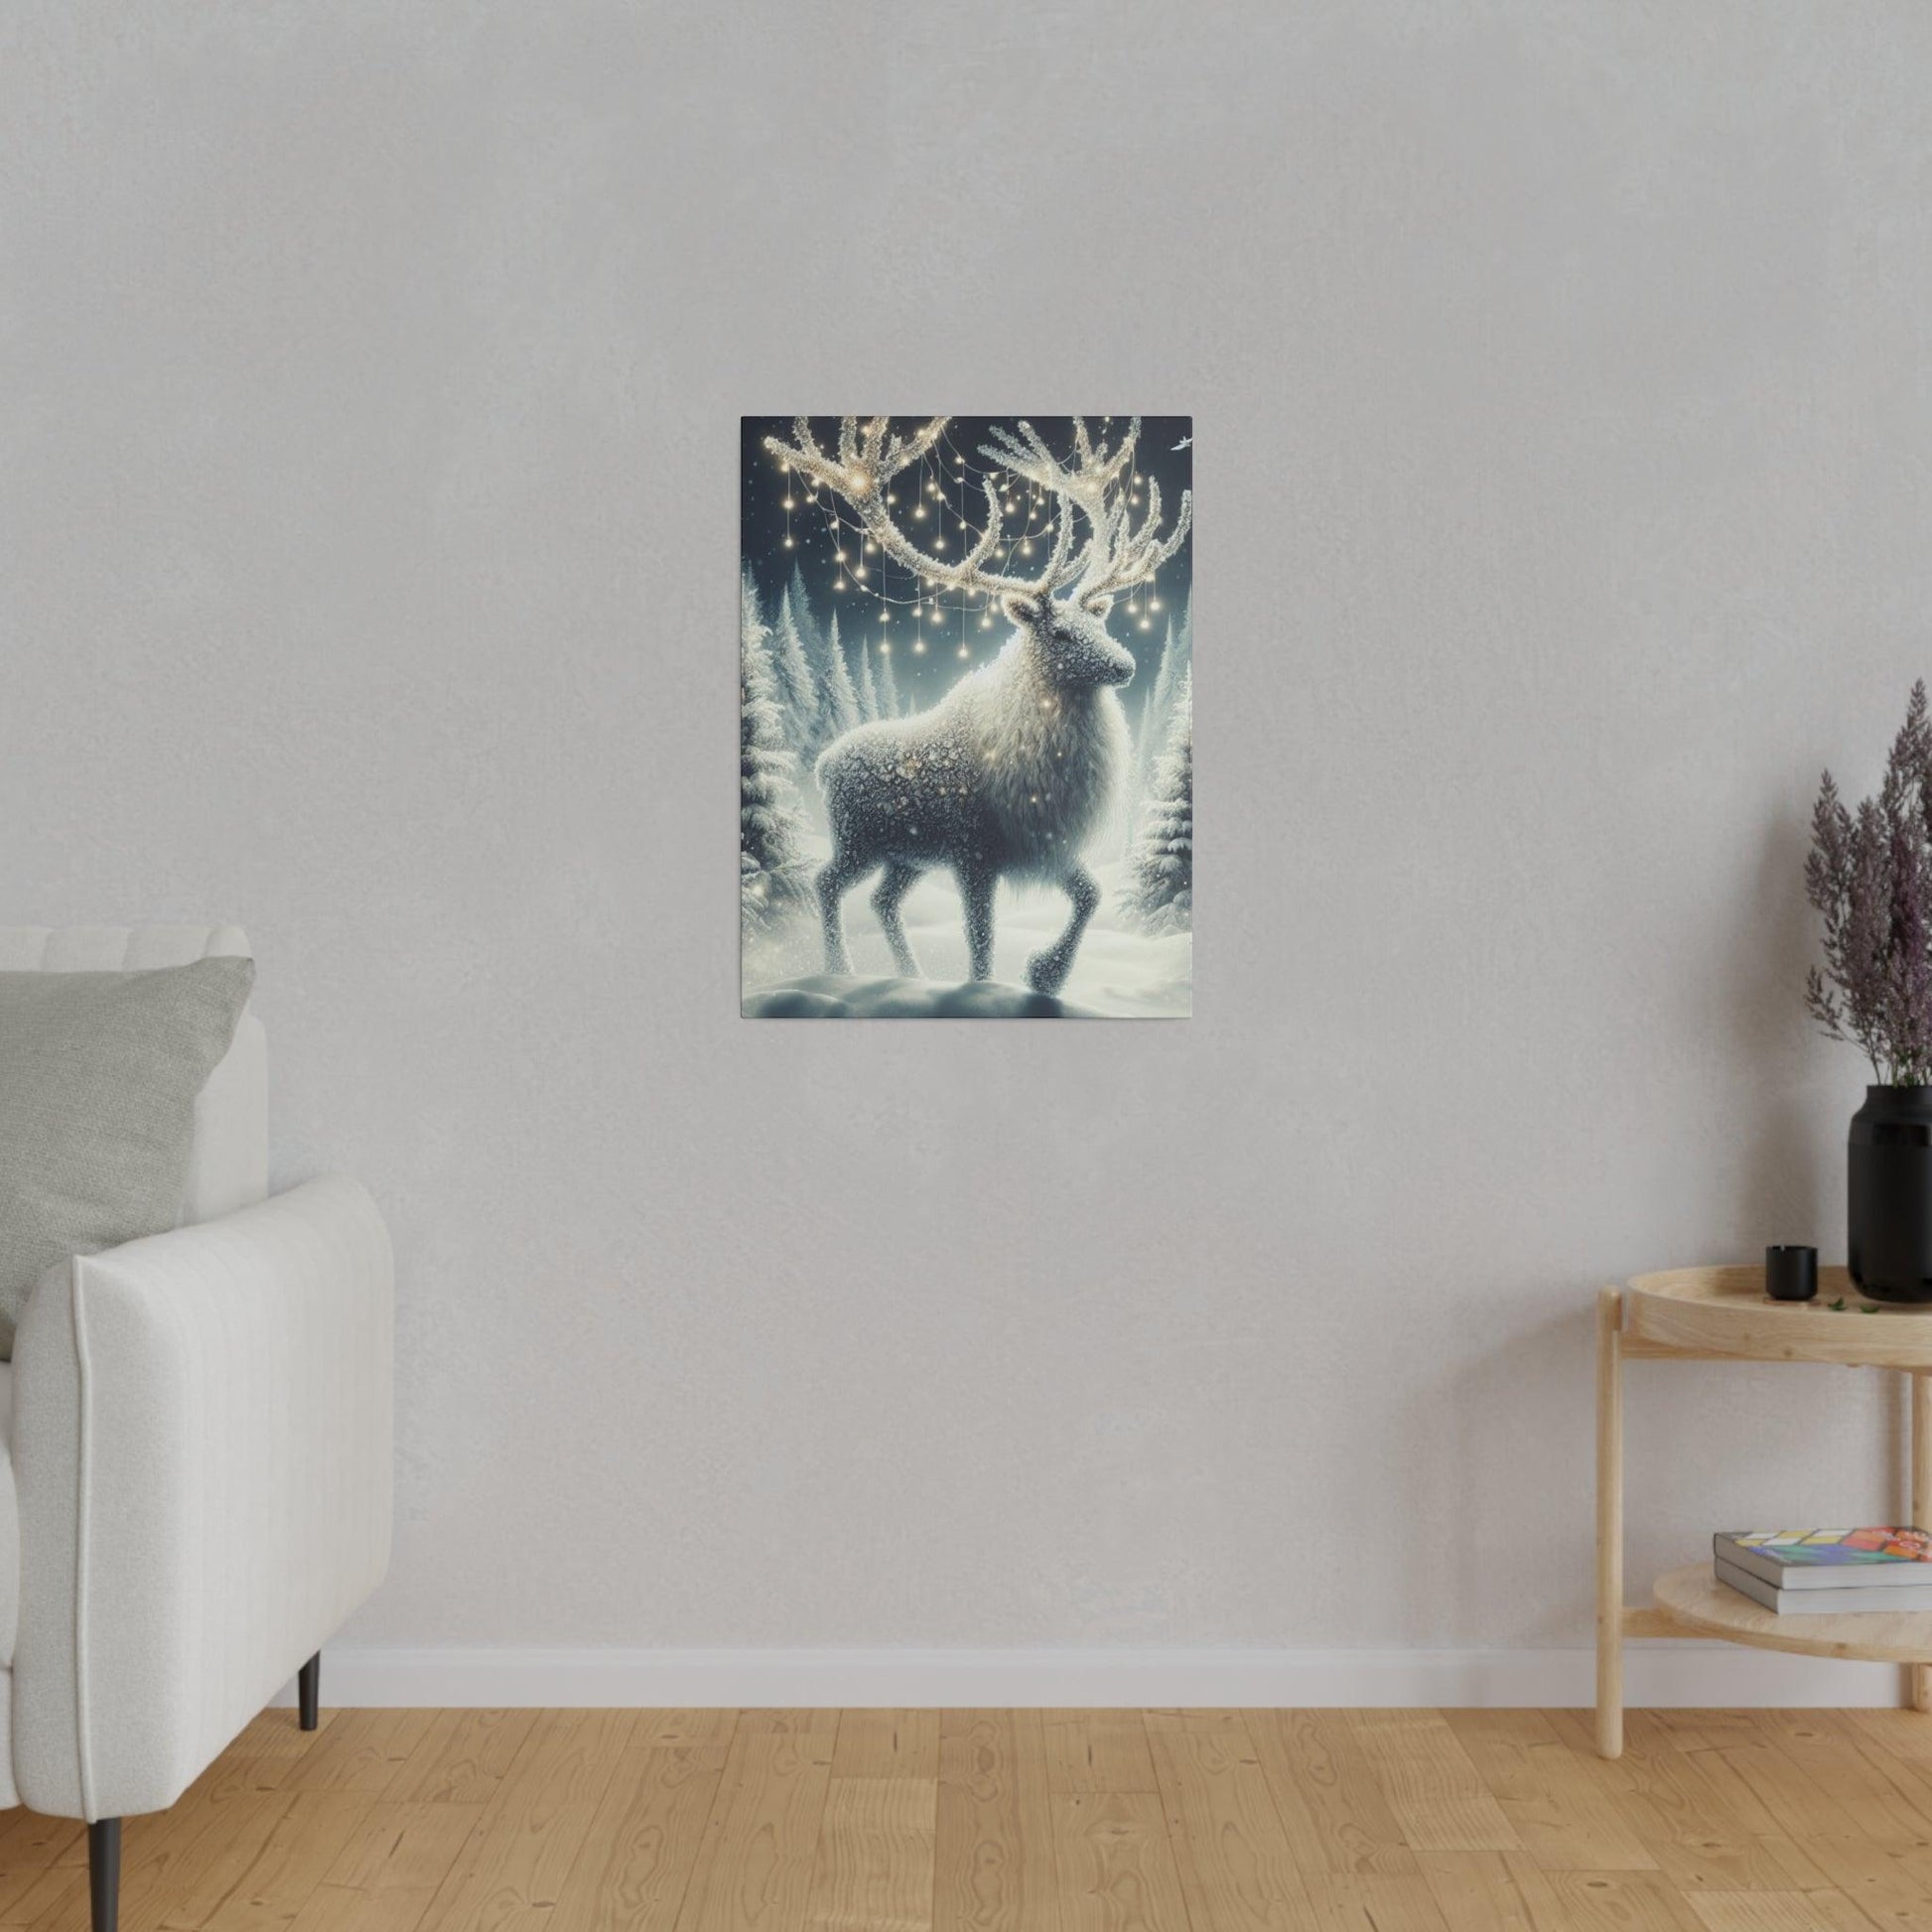 "Mystic Reindeer Journey: A Canvas Wall Art Odyssey" - The Alice Gallery